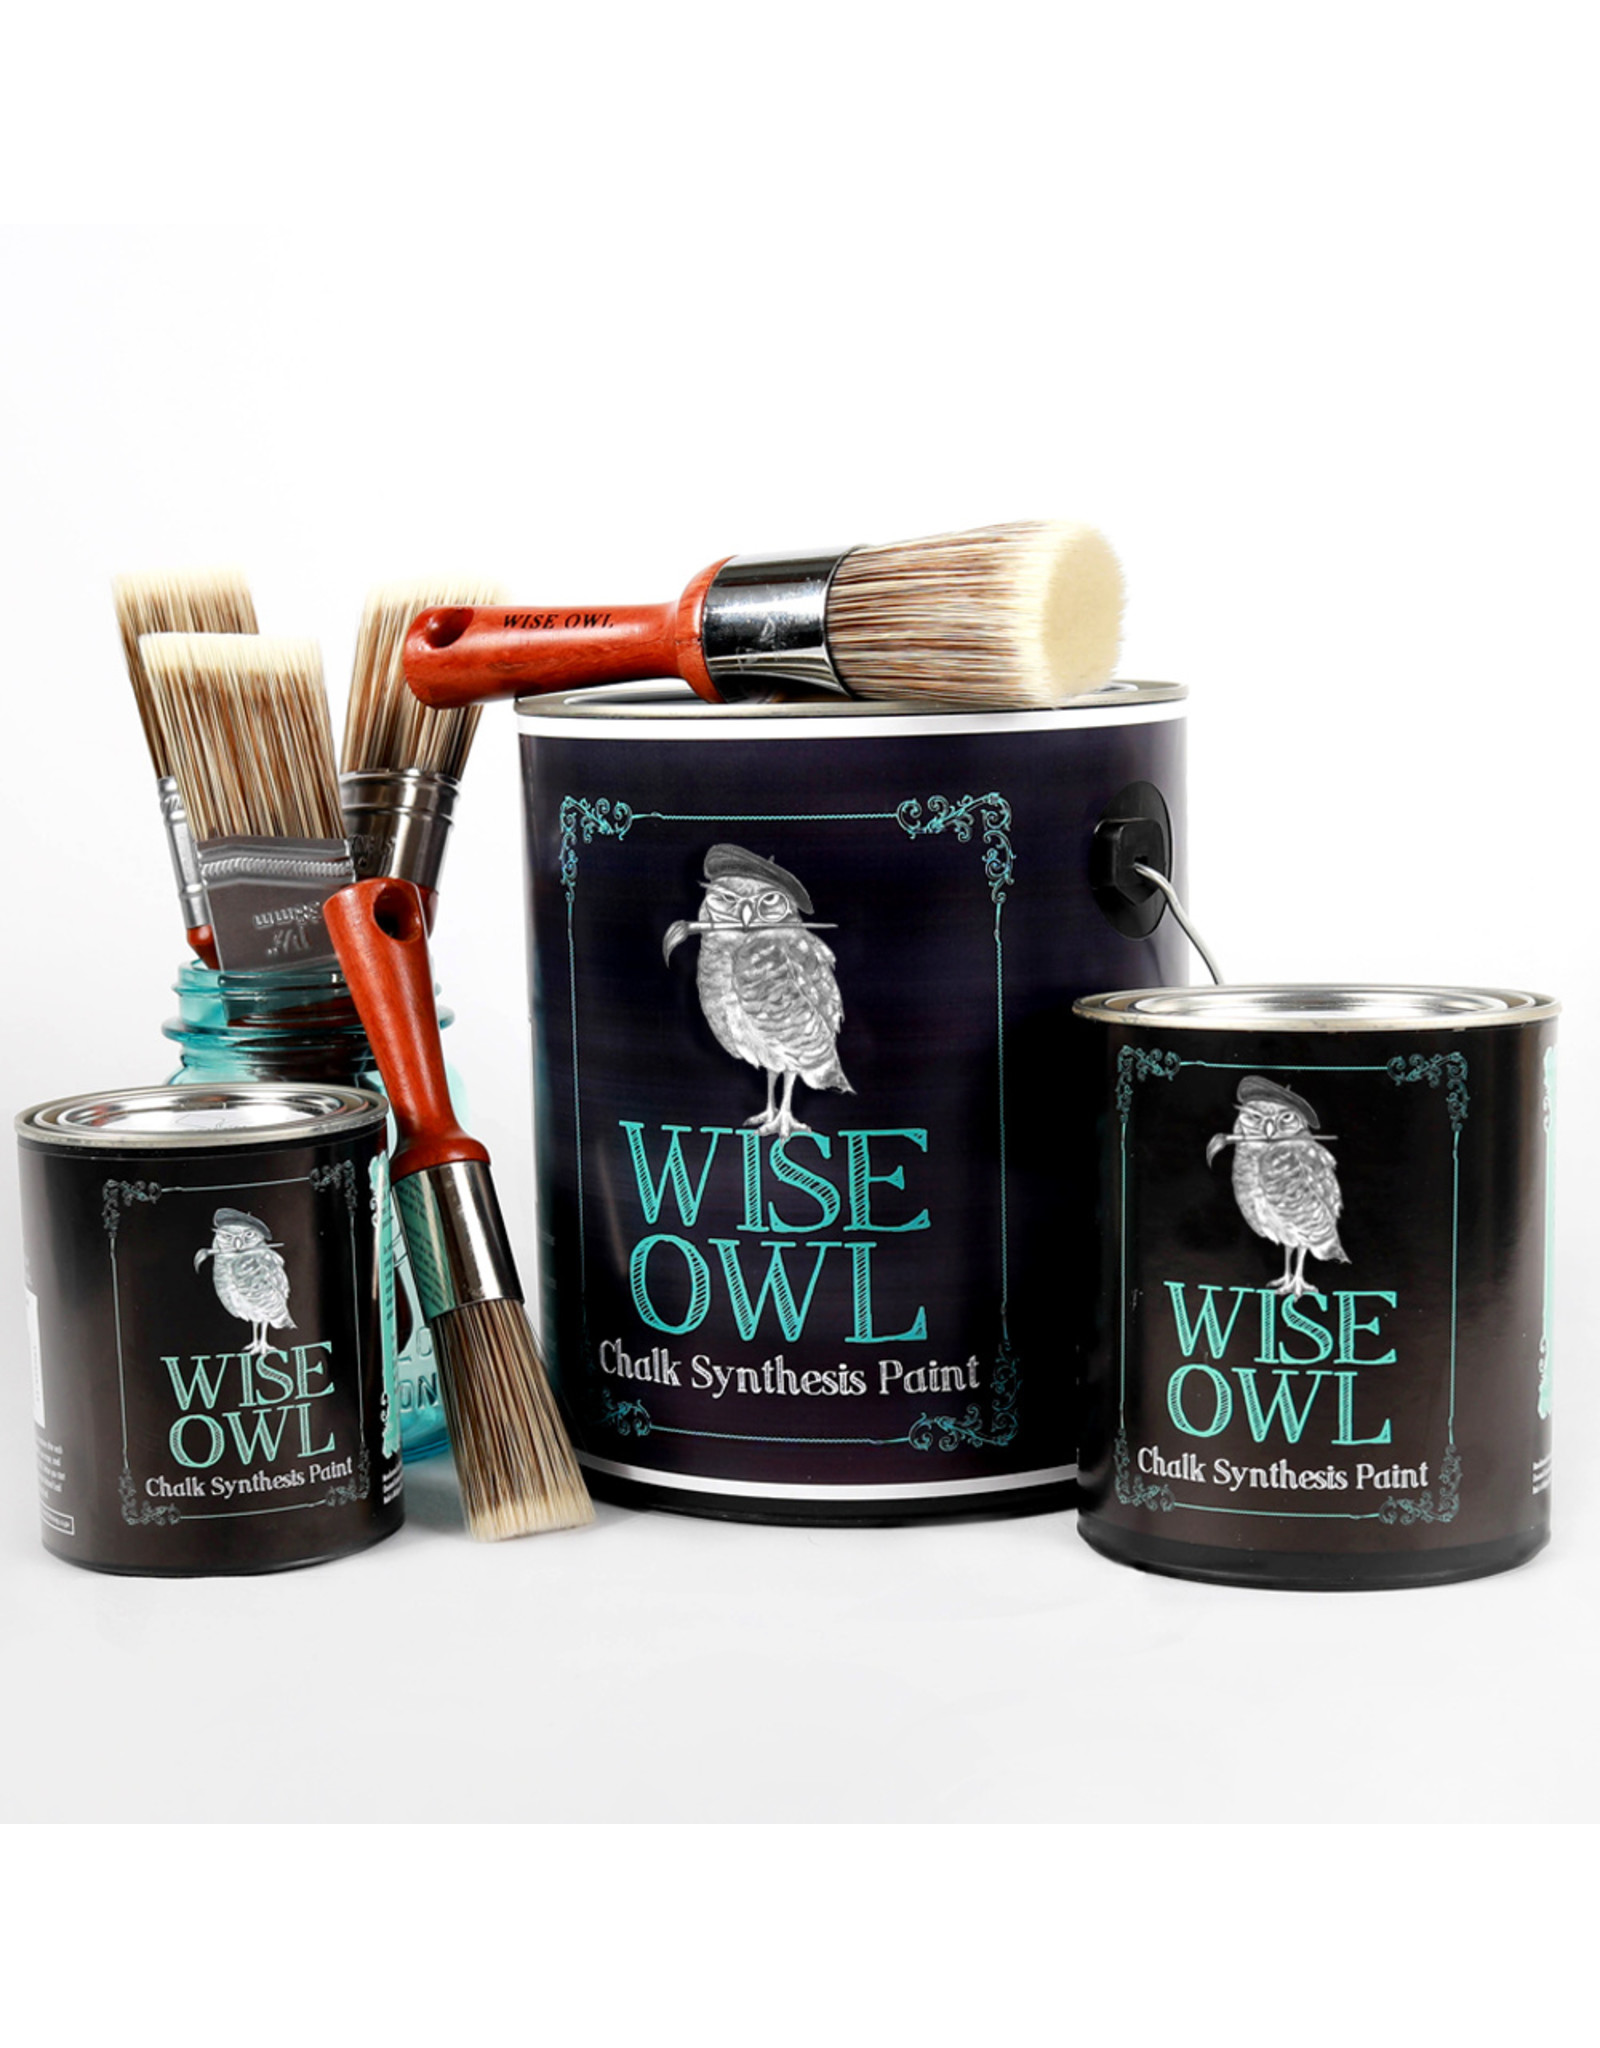 Wise Owl Paint Chalk Synthesis Paint-Botanical Pint